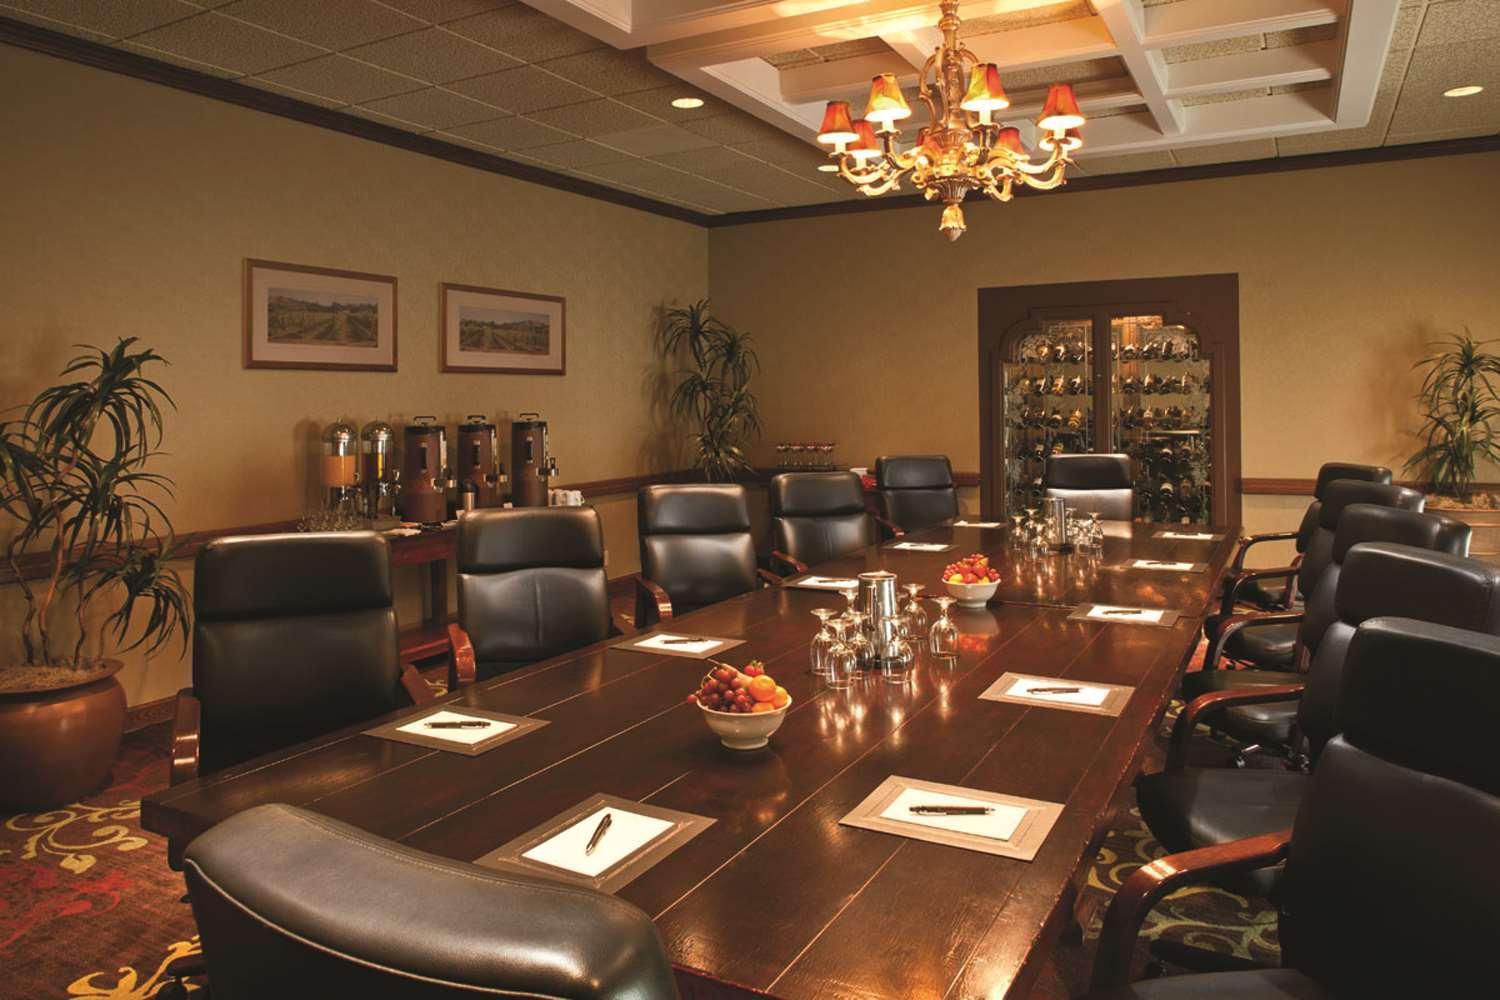 Doubletree By Hilton Sonoma Wine Country Hotel Rohnert Park Facilities photo